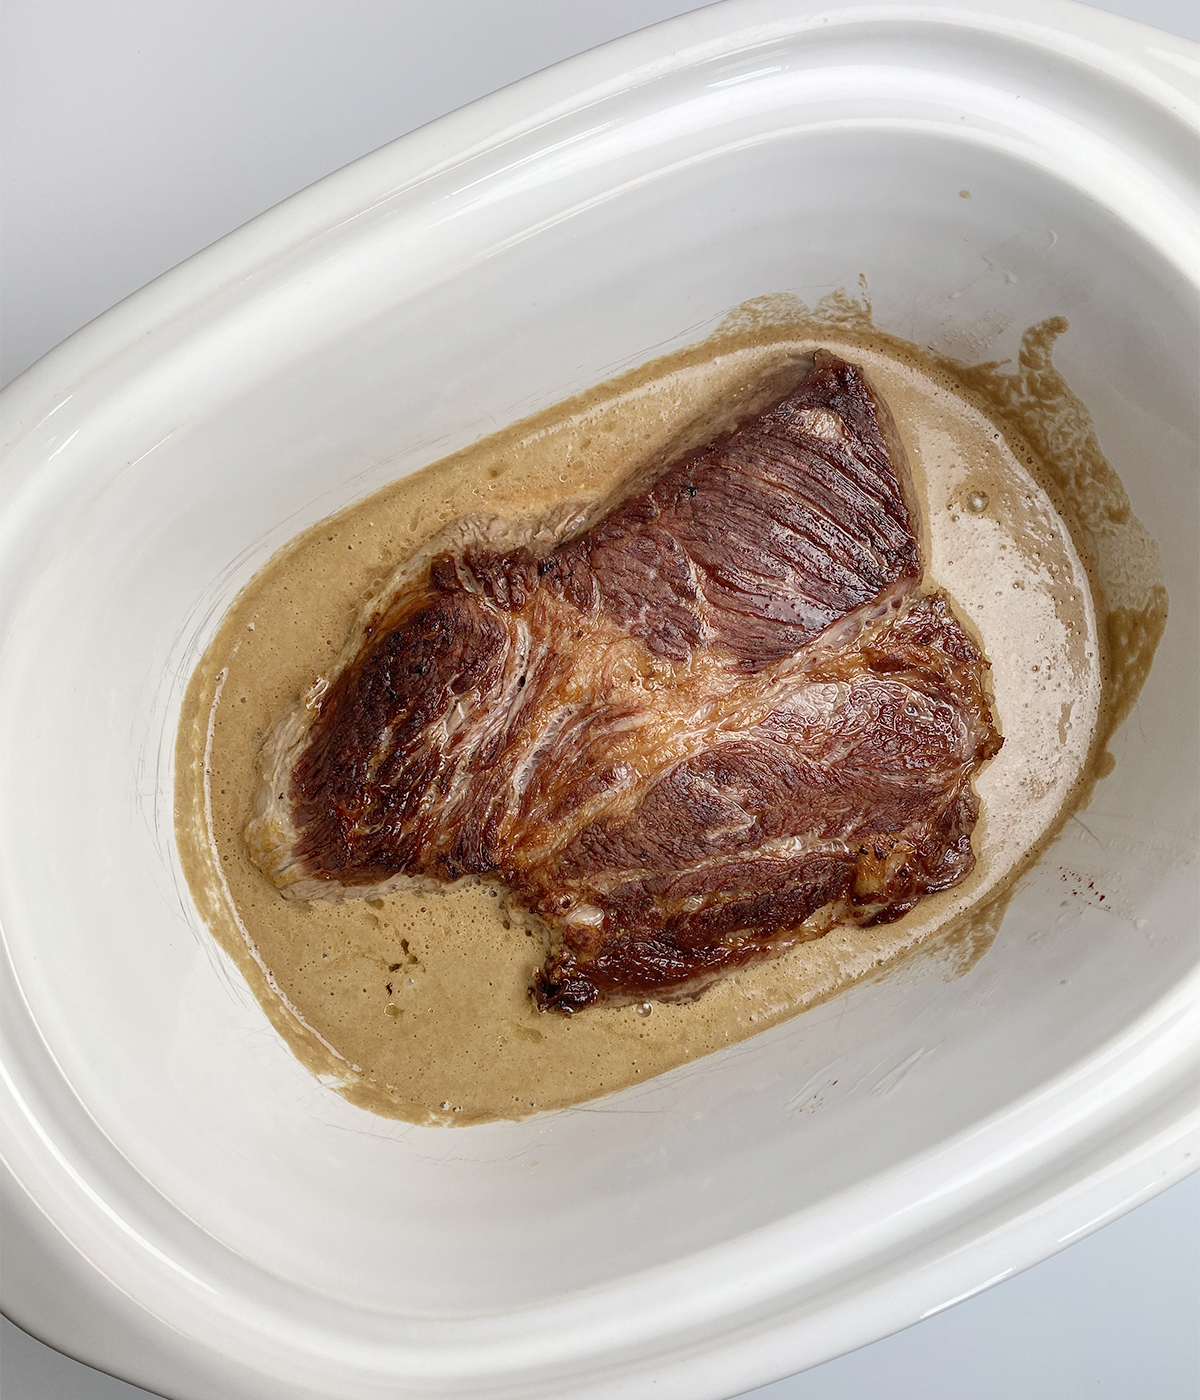 Seared chuck roast and cola sauce in a slow cooker ready to be cooked.